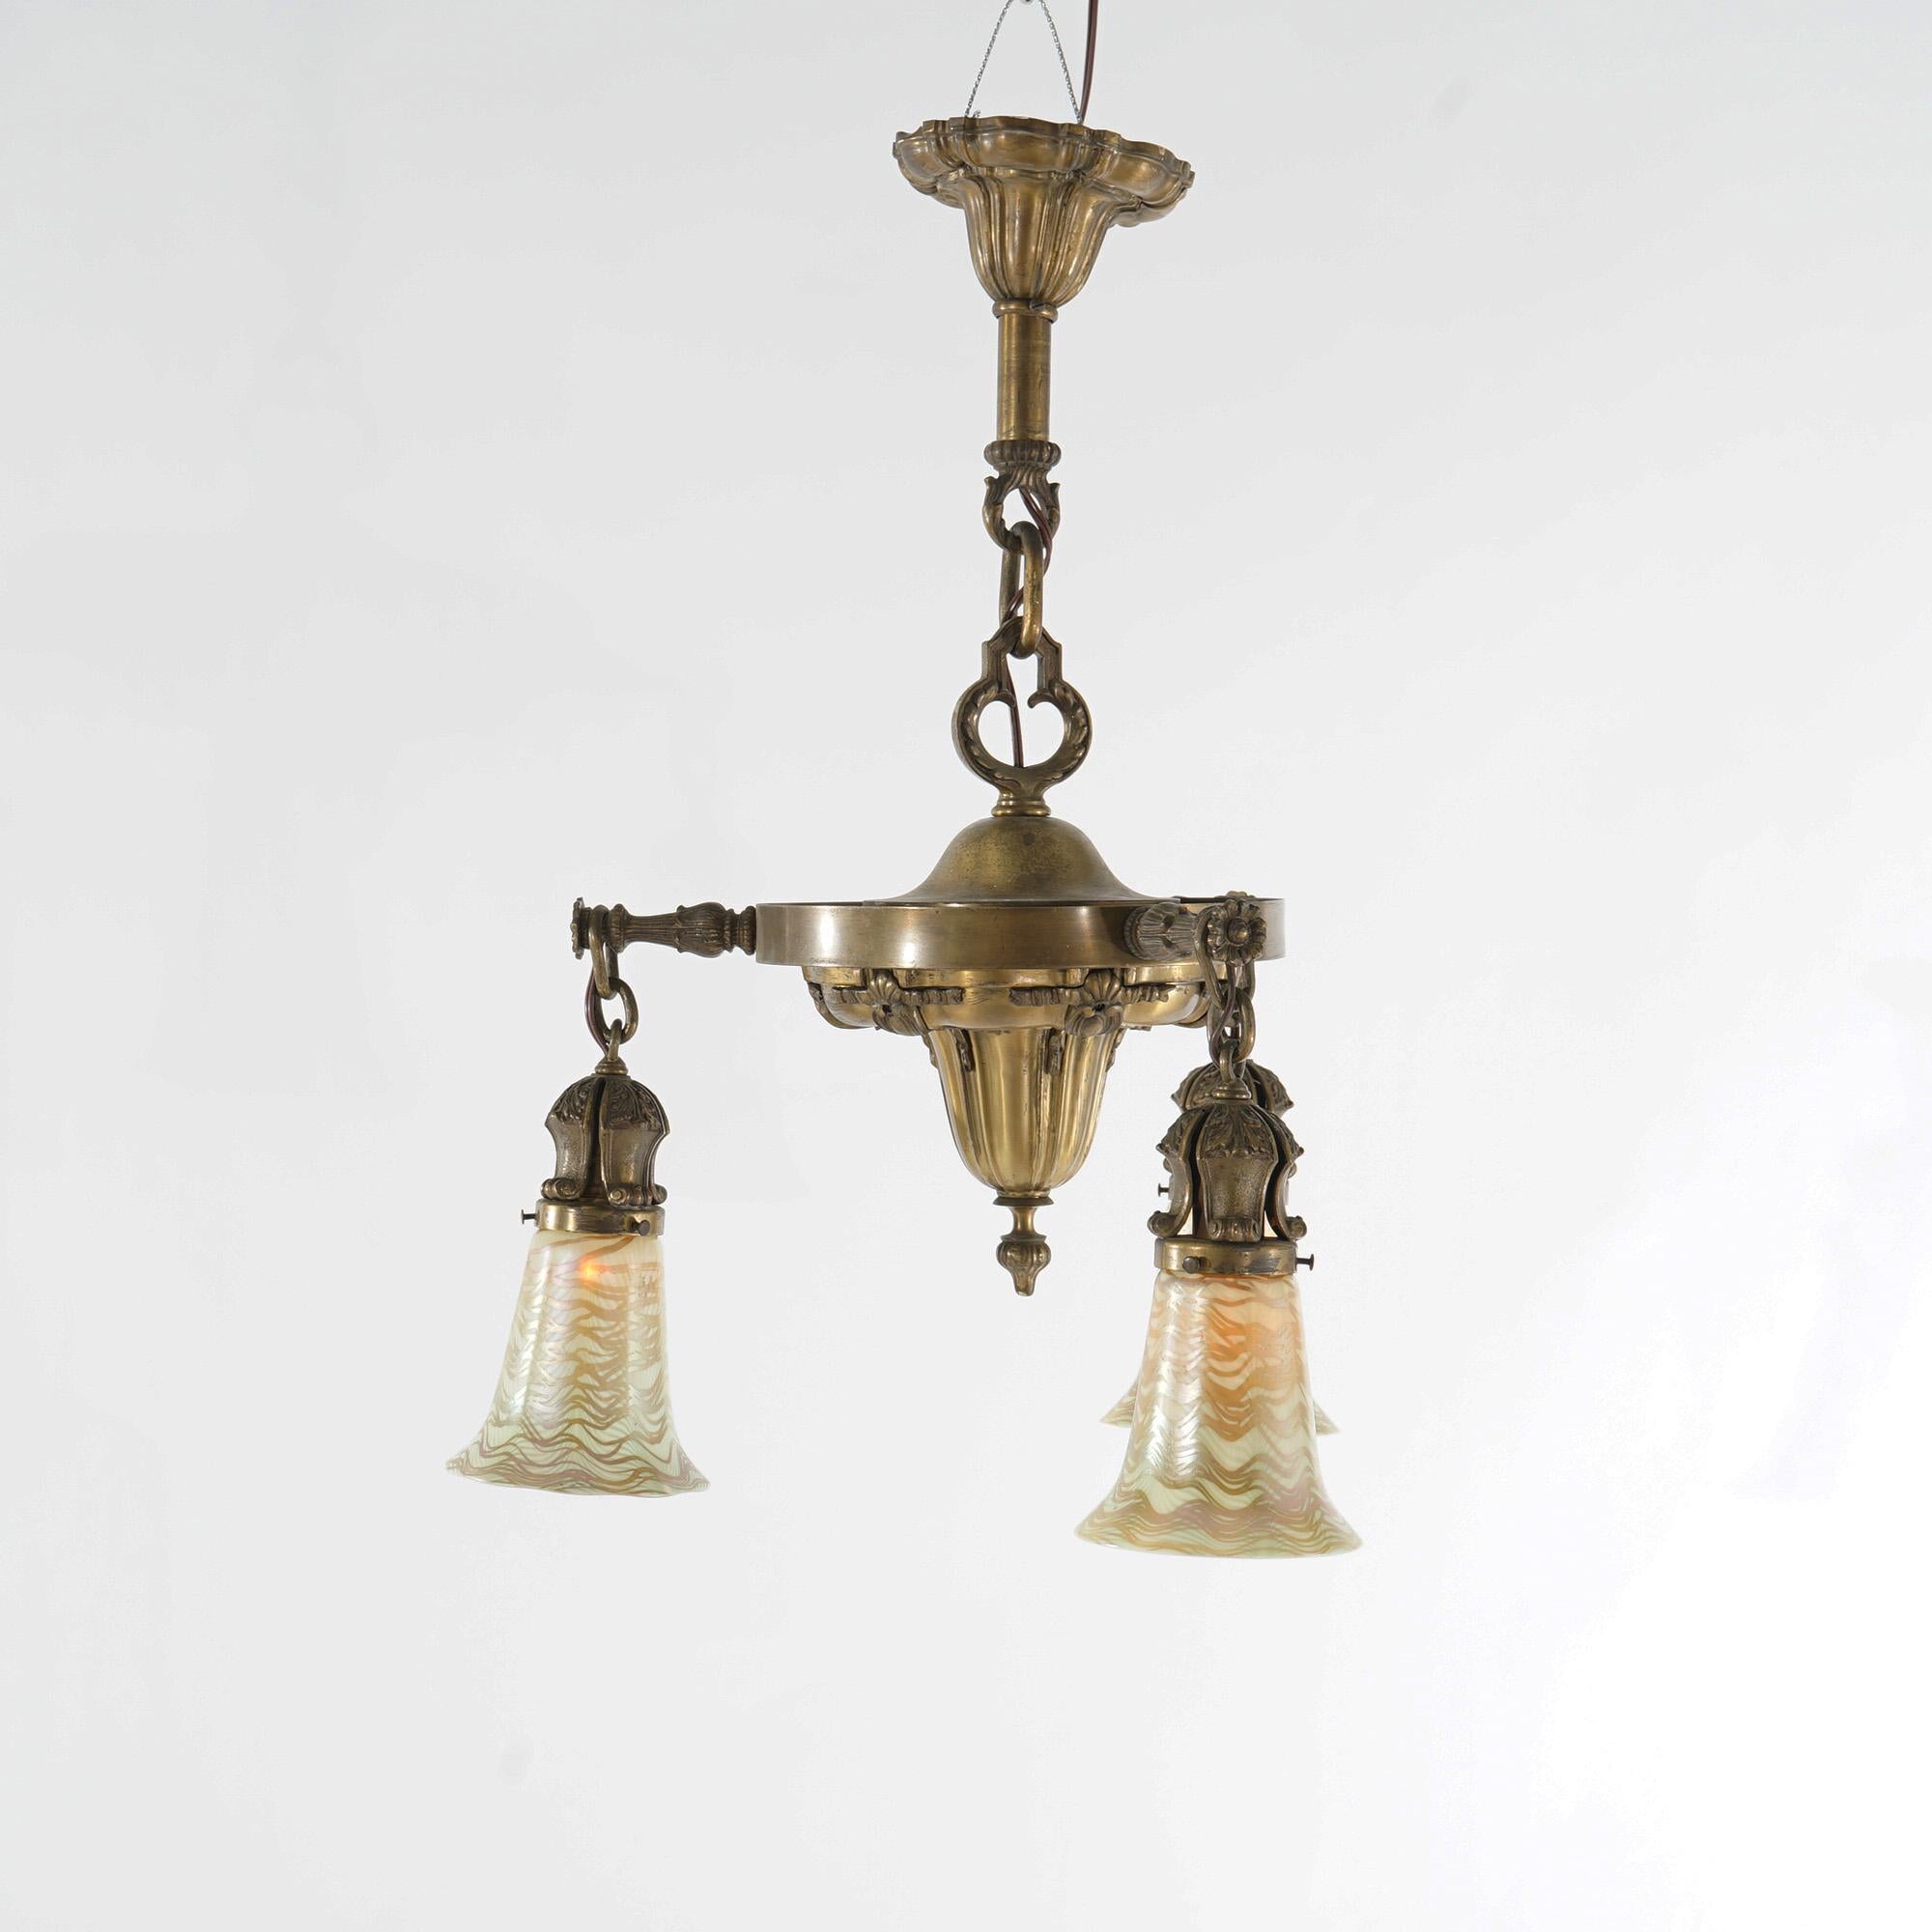 An antique Arts and Crafts chandelier offers a brass frame with three drop lights terminating in Quezal art glass shades, c1910

Measures - 27